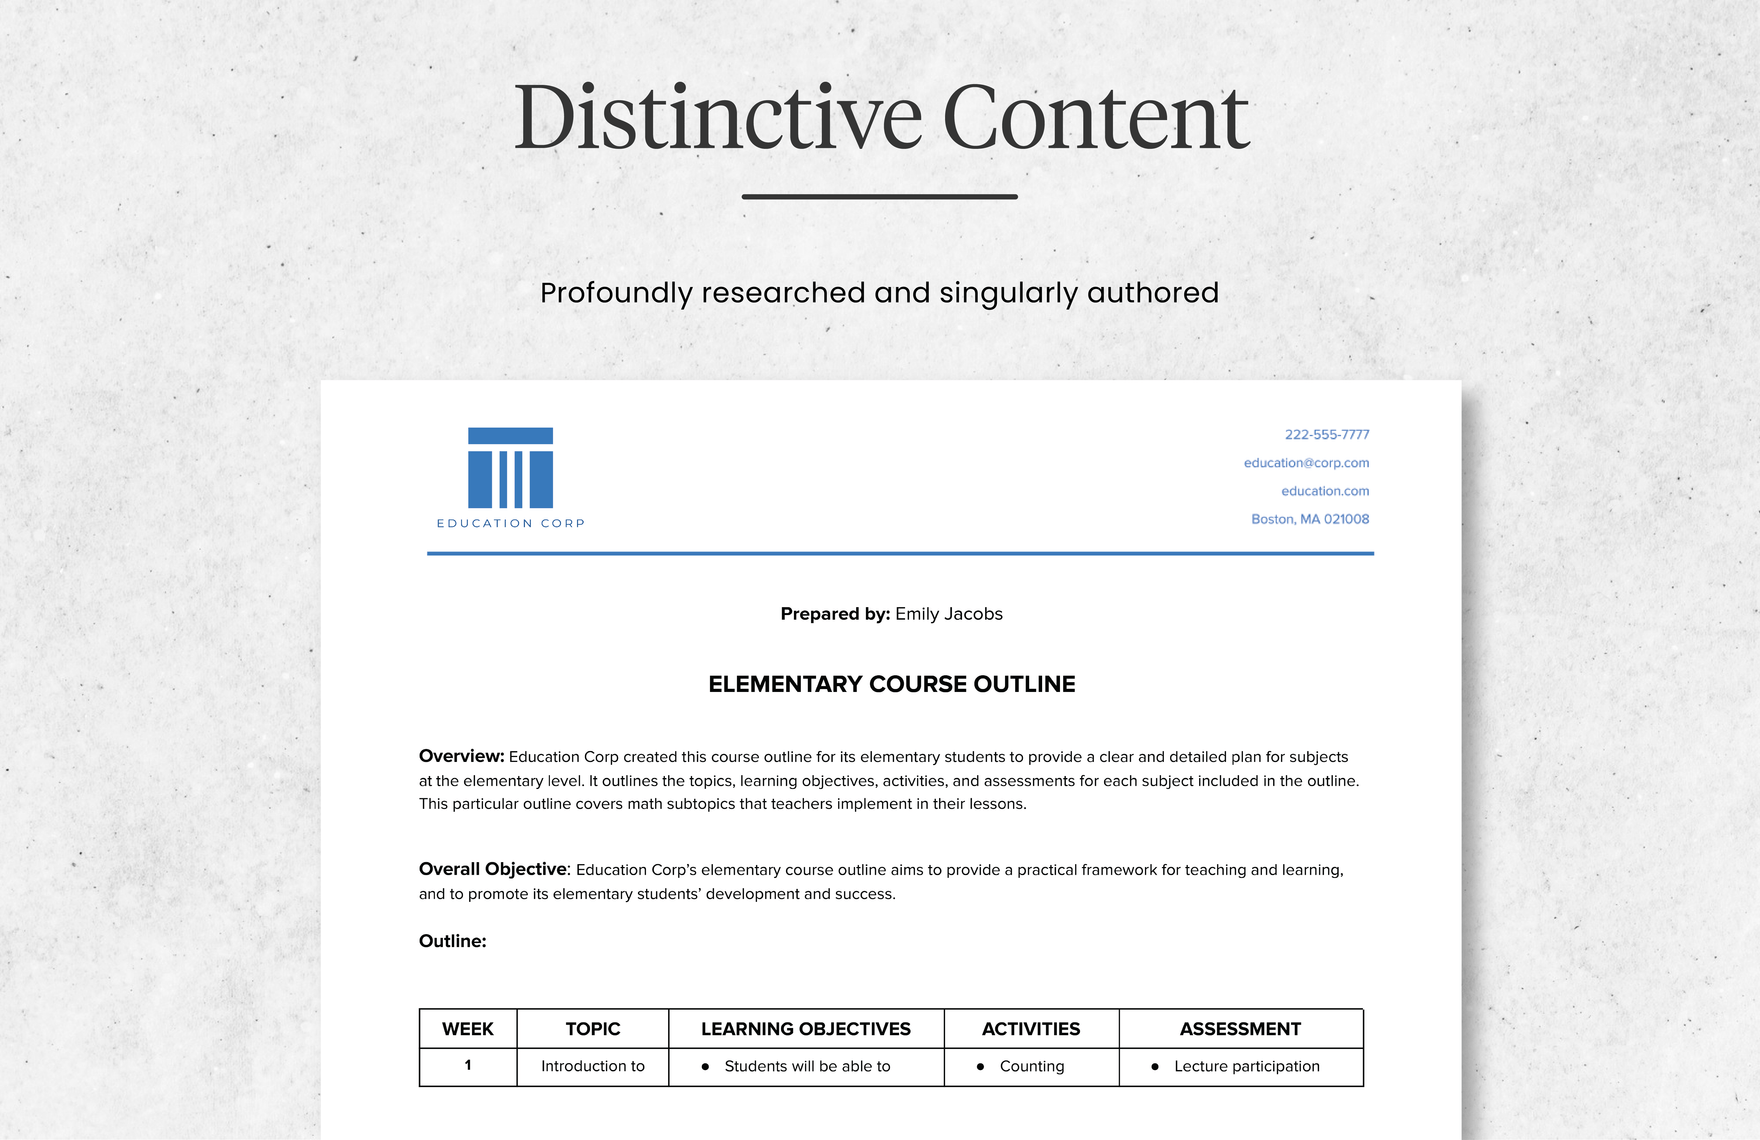 Elementary Course Outline Template